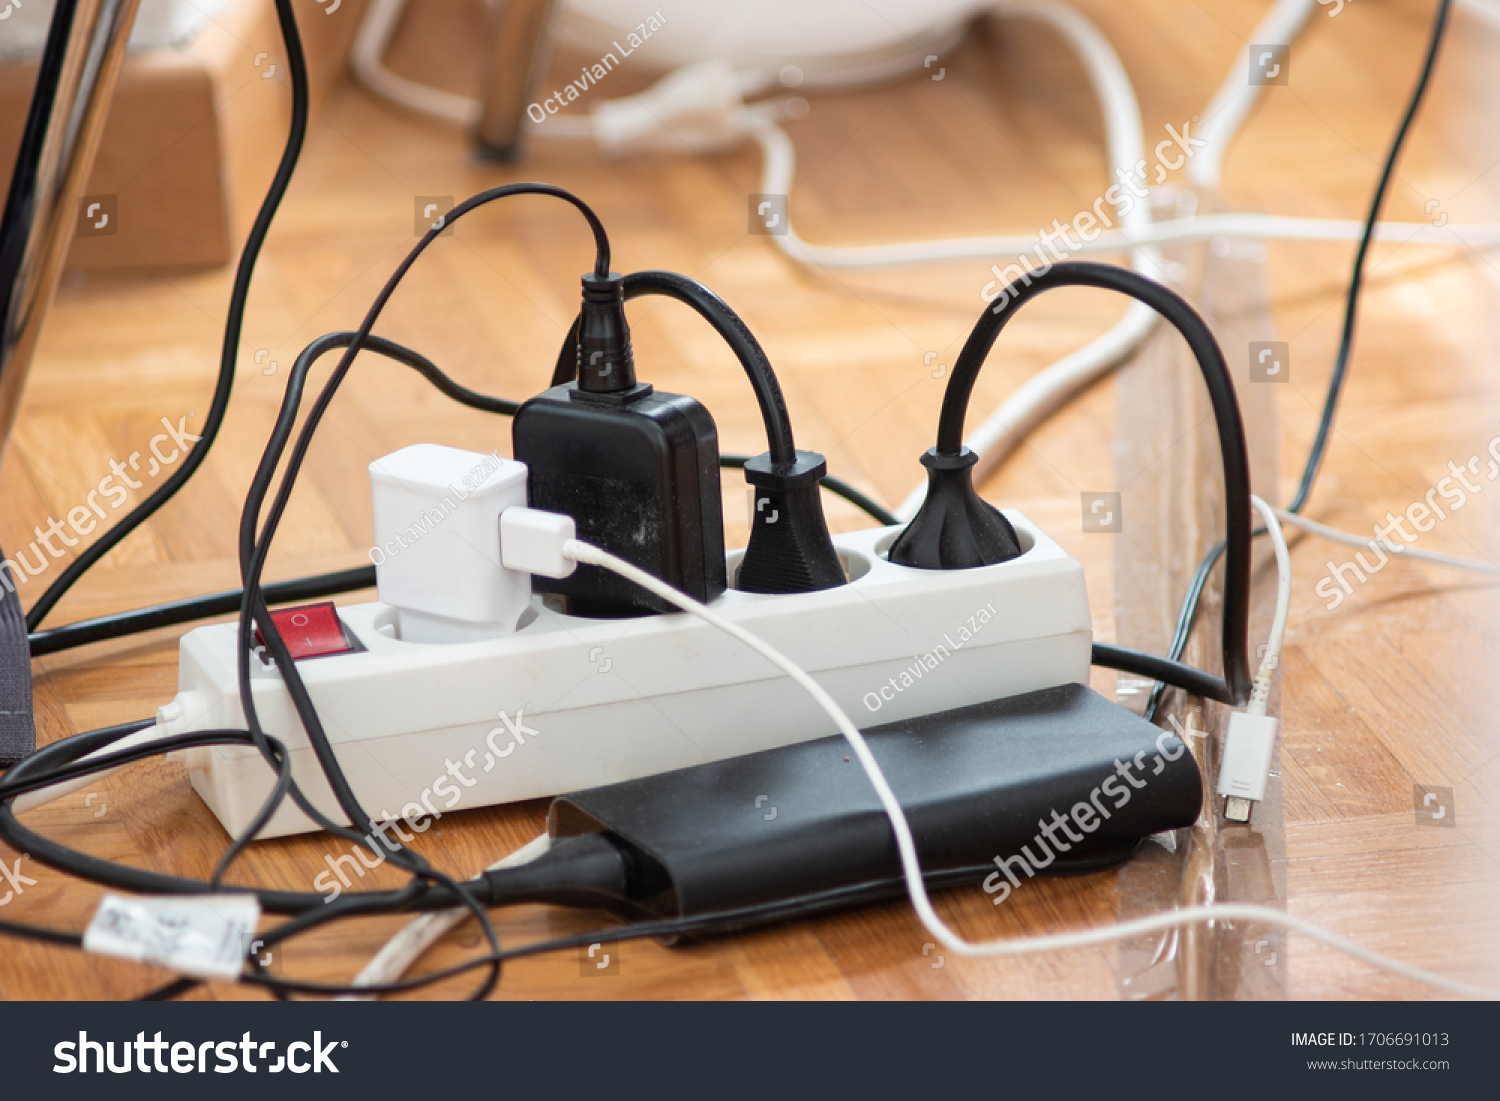 Messy outlet power extension cord on an apartment floor with various charging devices plugged in 2020 #1706691013